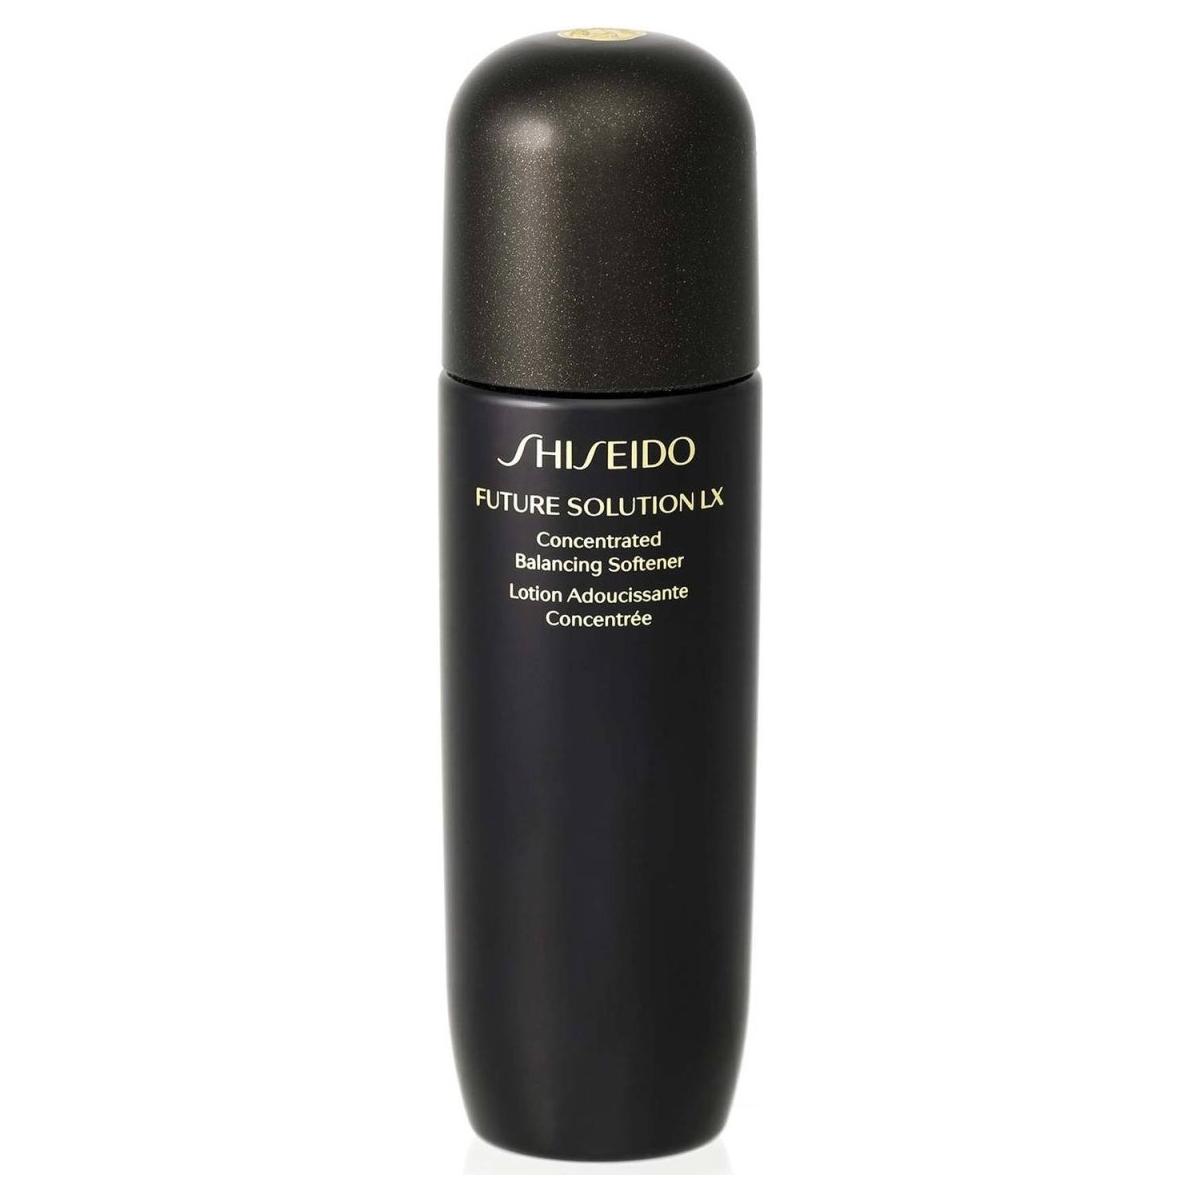 Shiseido Future Solution LX: Concentrated Balancing Softener 170ml - Glam Global UK